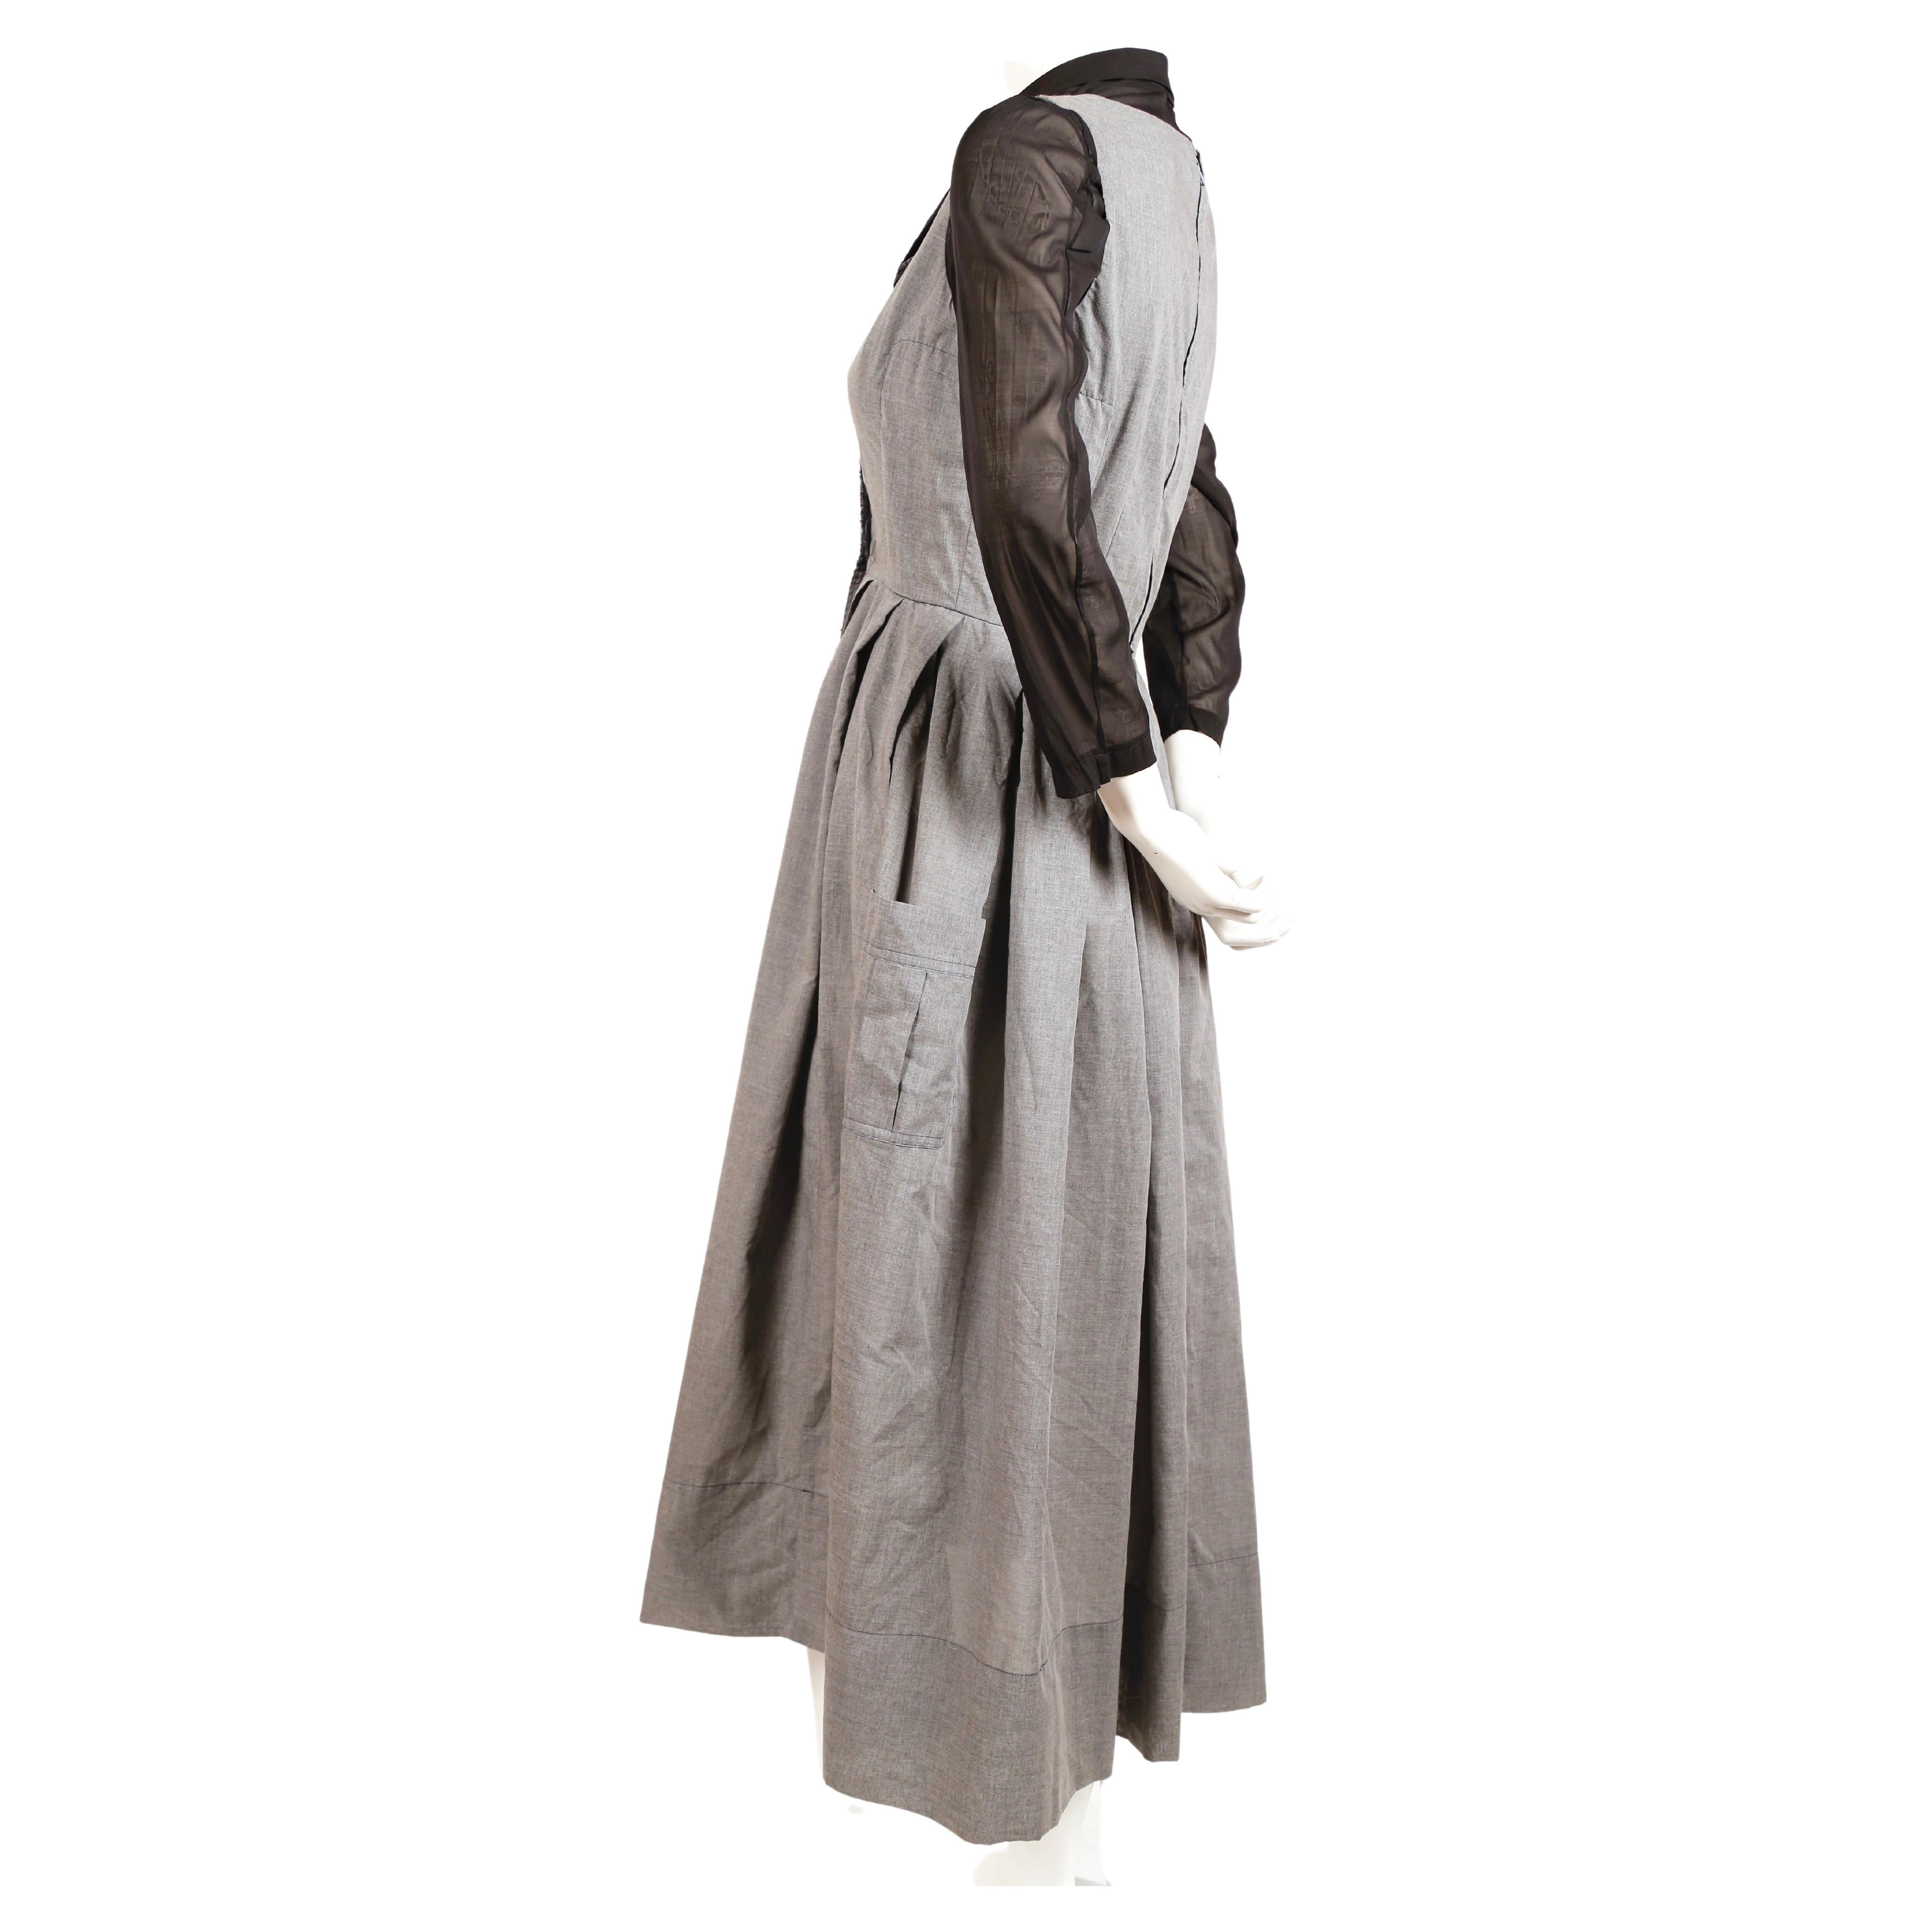 Heathered-grey and black double layer dress with safety pin closure designed by Rei Kawakubo for Comme Des Garcons dating to spring of 2000 as seen on the runway. Labeled a size M however this dress best fits an XS or 32